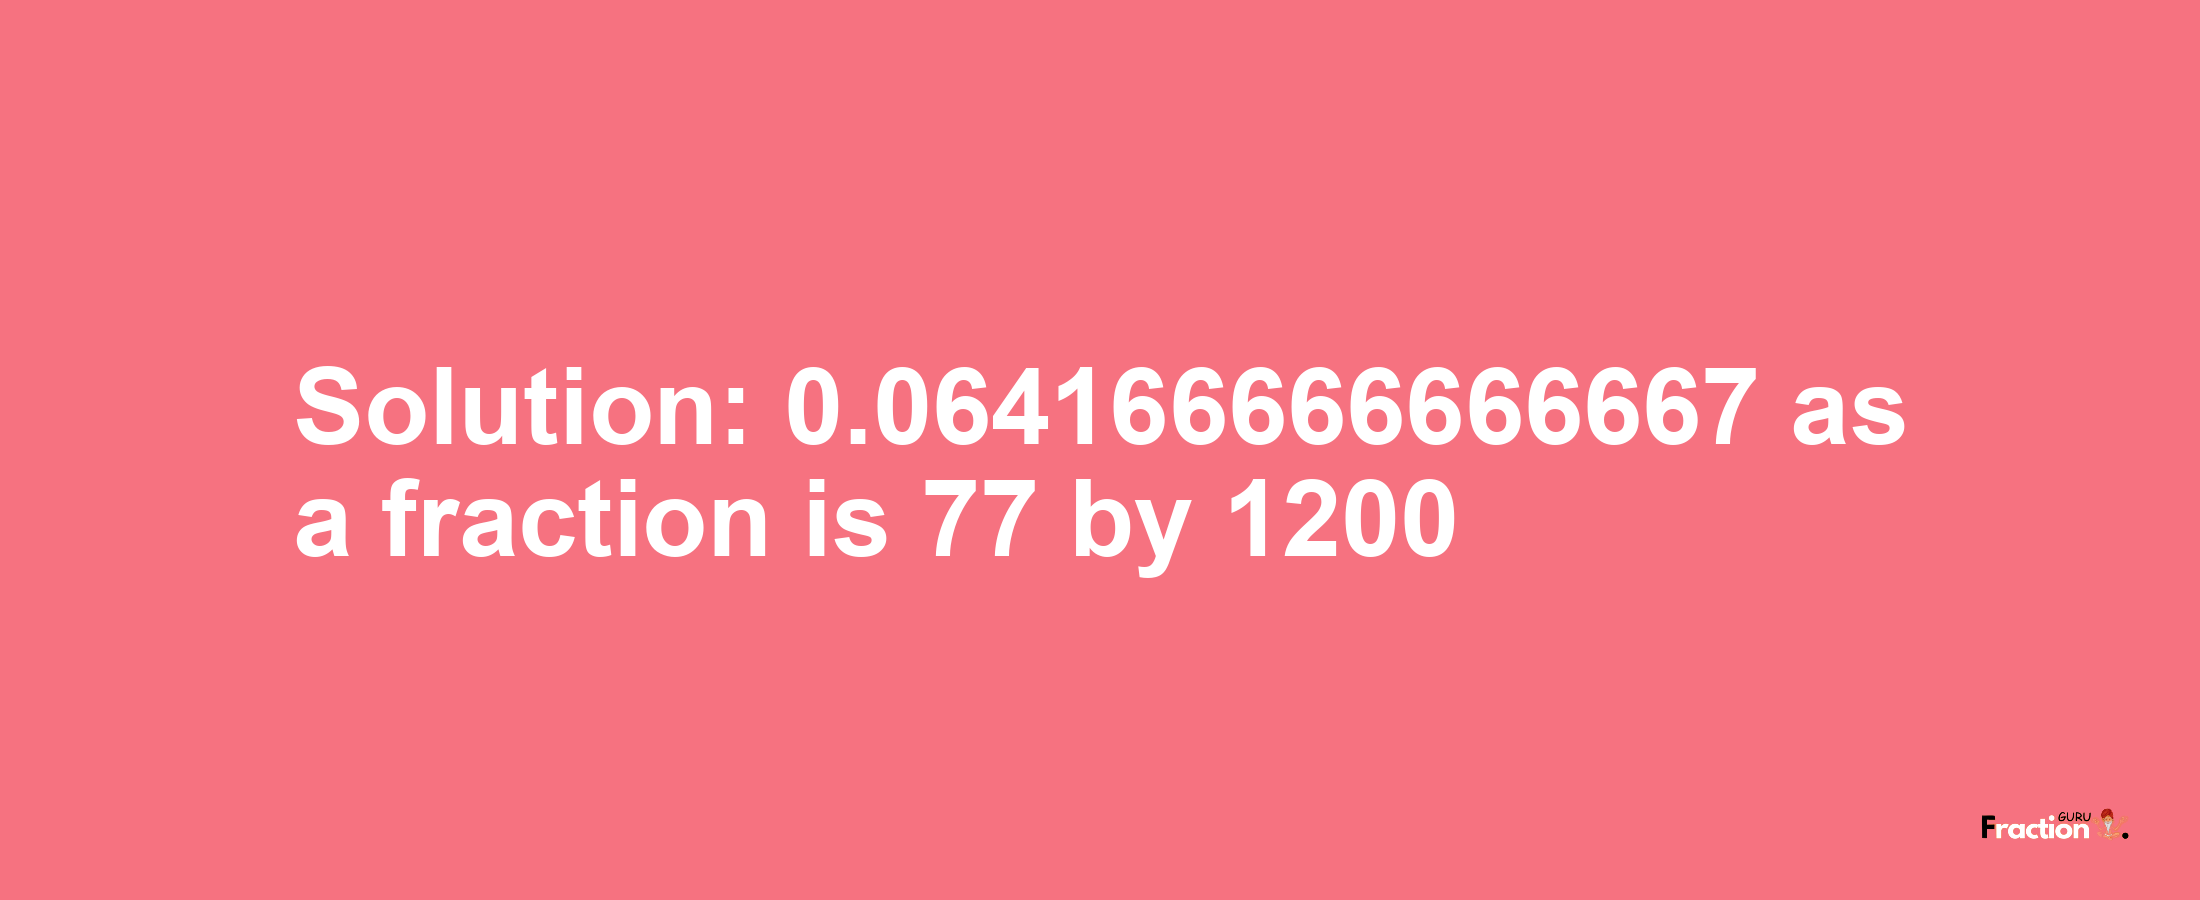 Solution:0.064166666666667 as a fraction is 77/1200